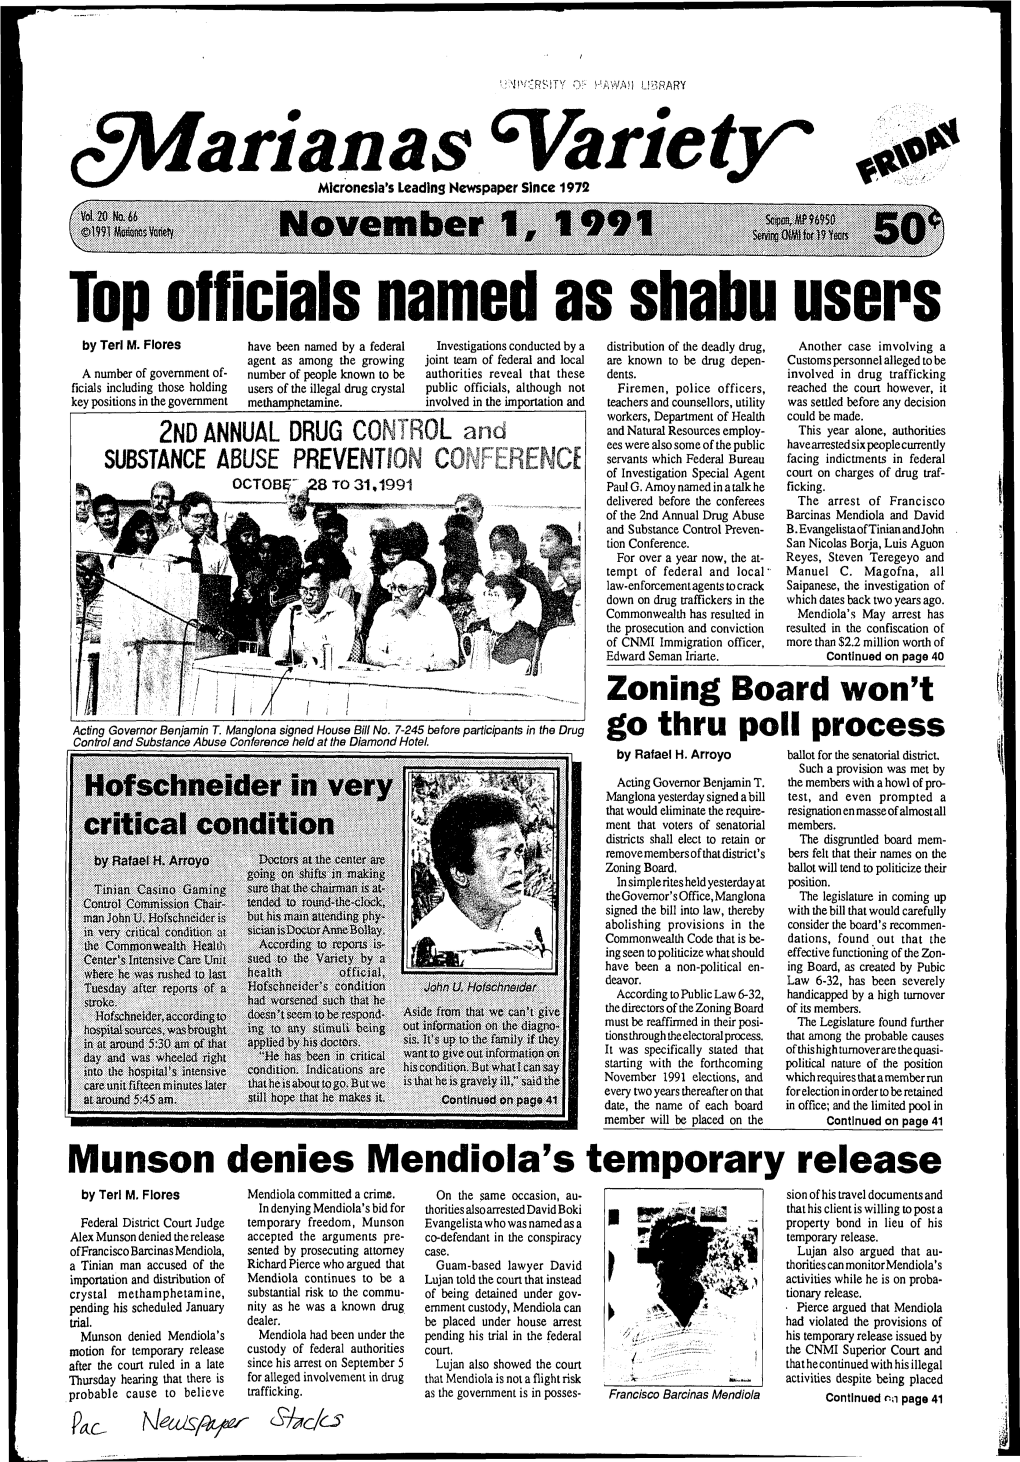 Top Officials Named As Shabu Users by Terl M